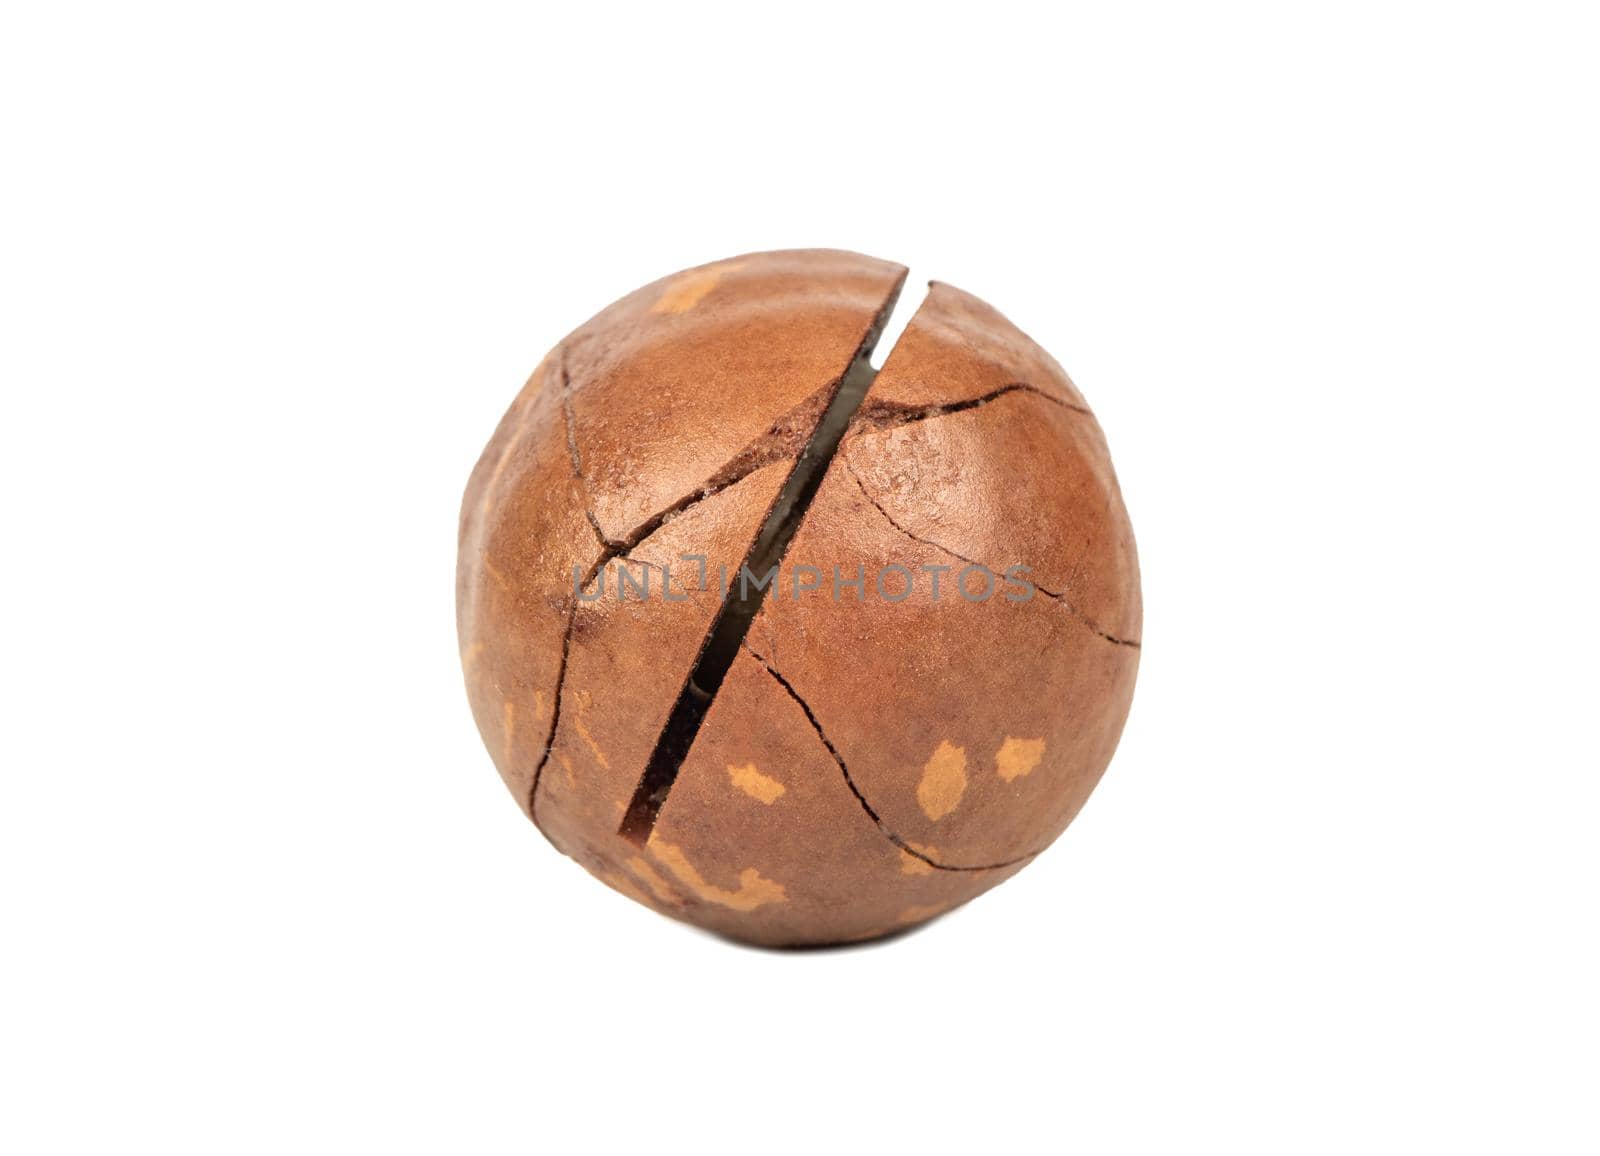 Macadamia nut in a shell with cracks isolated on a white background